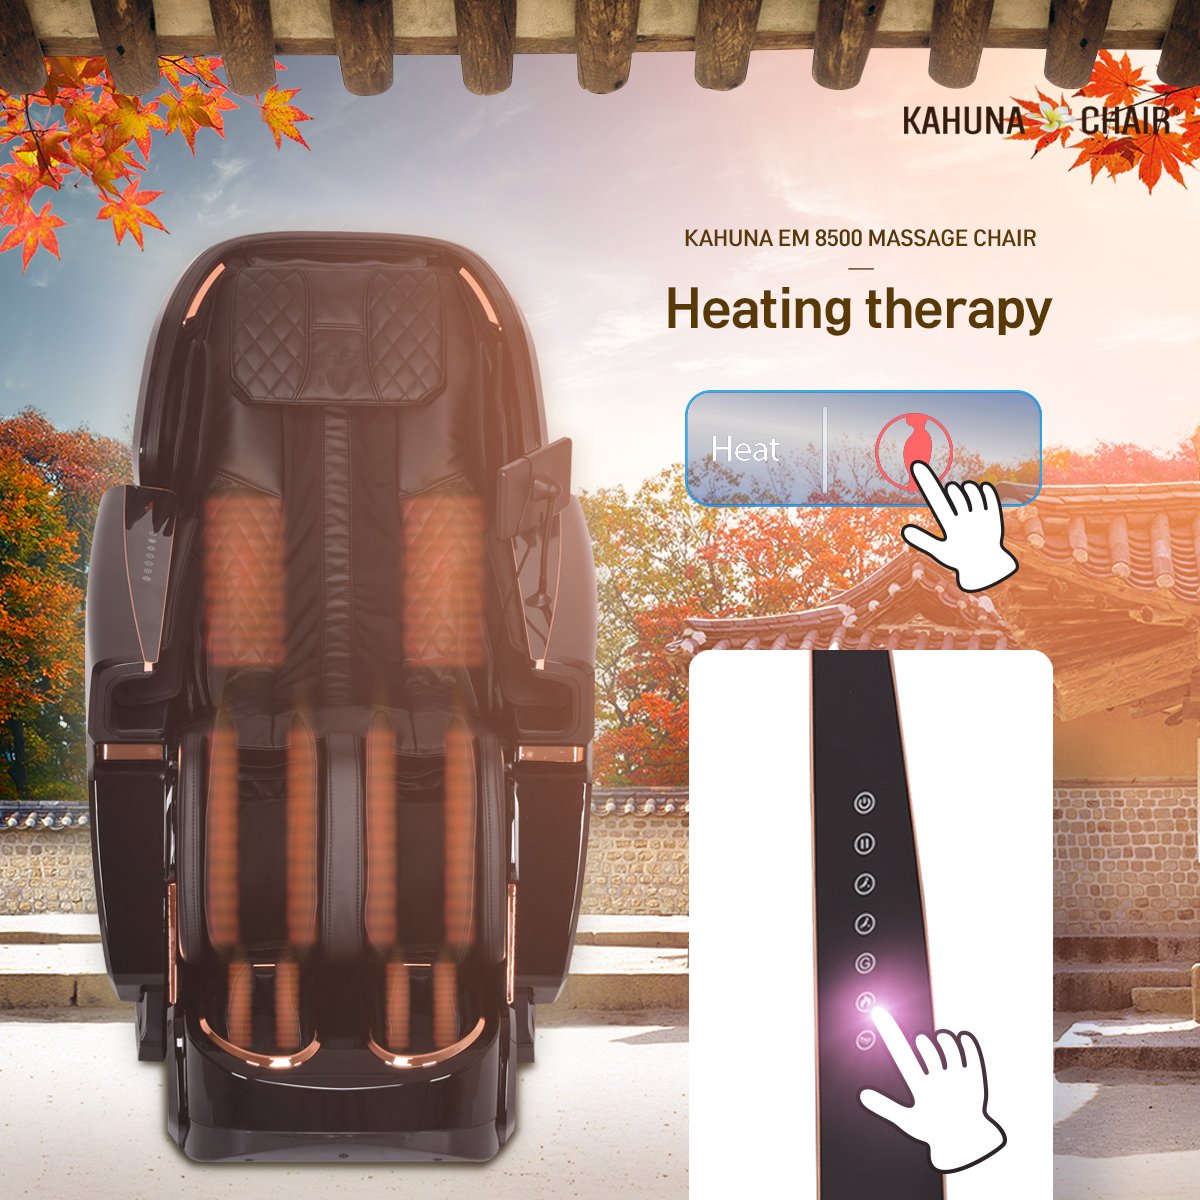 kahuna massage chair em8500 with heating therapy